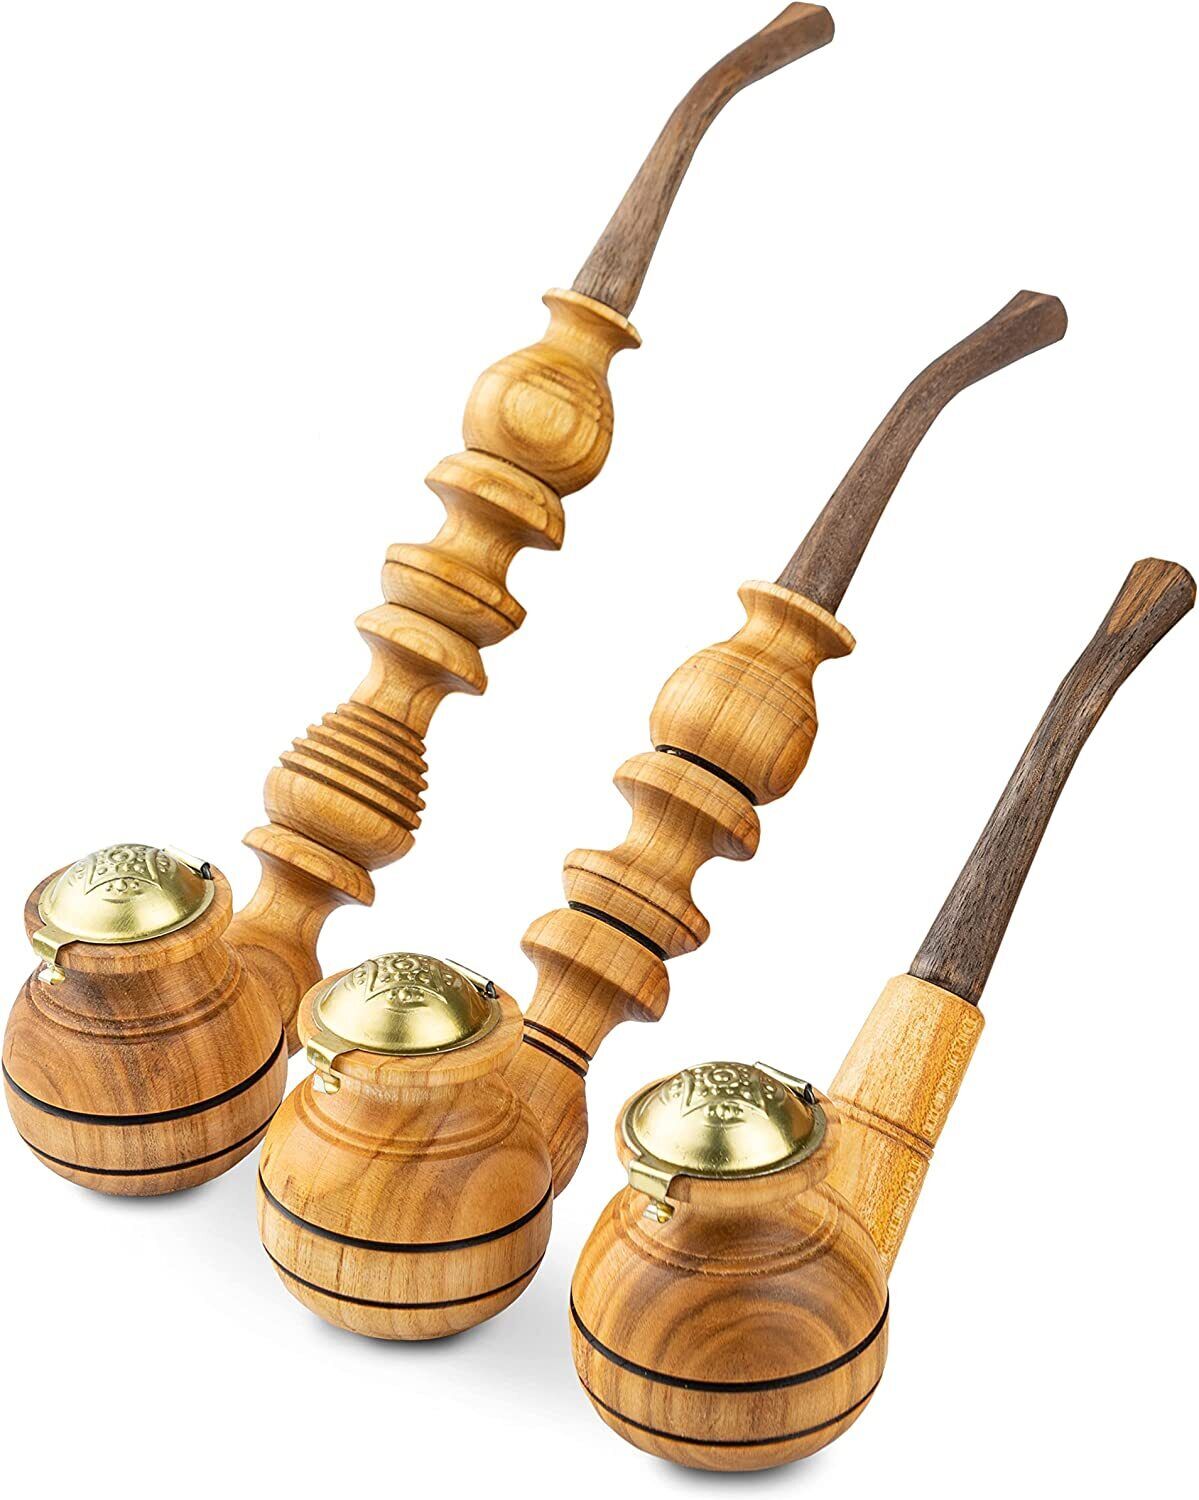 Dr. Watson - Wooden Tobacco Pipes, Set of 3, Classic, Handmade from Natural Wood